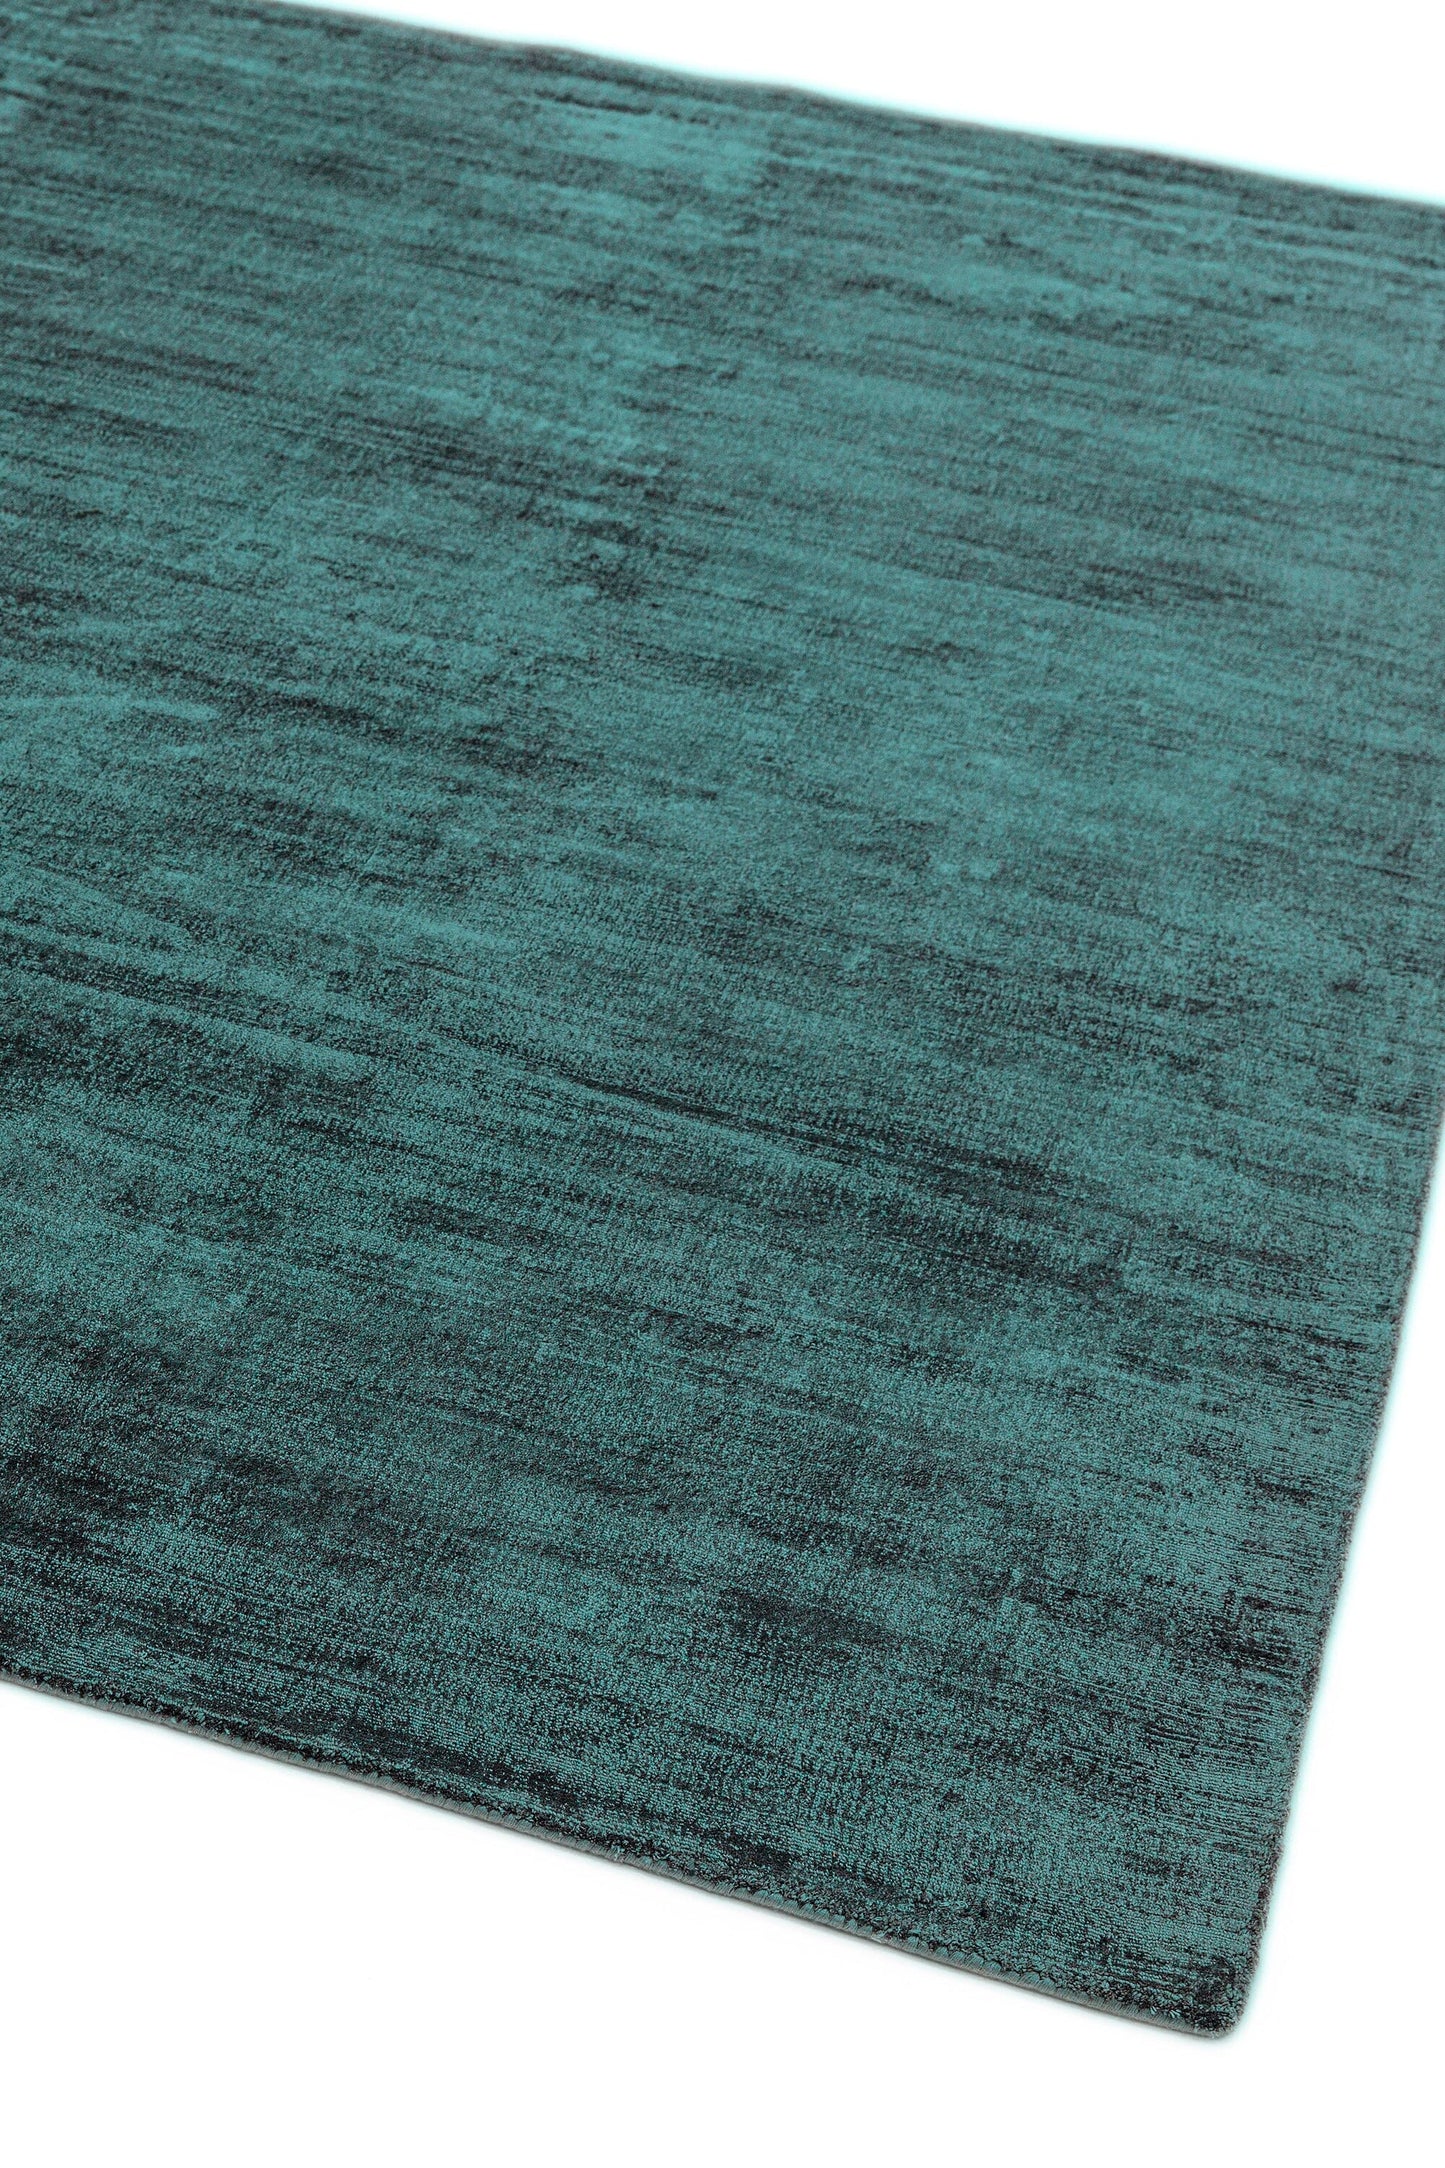 Asiatic Carpets Blade Hand Woven Runner Teal - 66 x 240cm